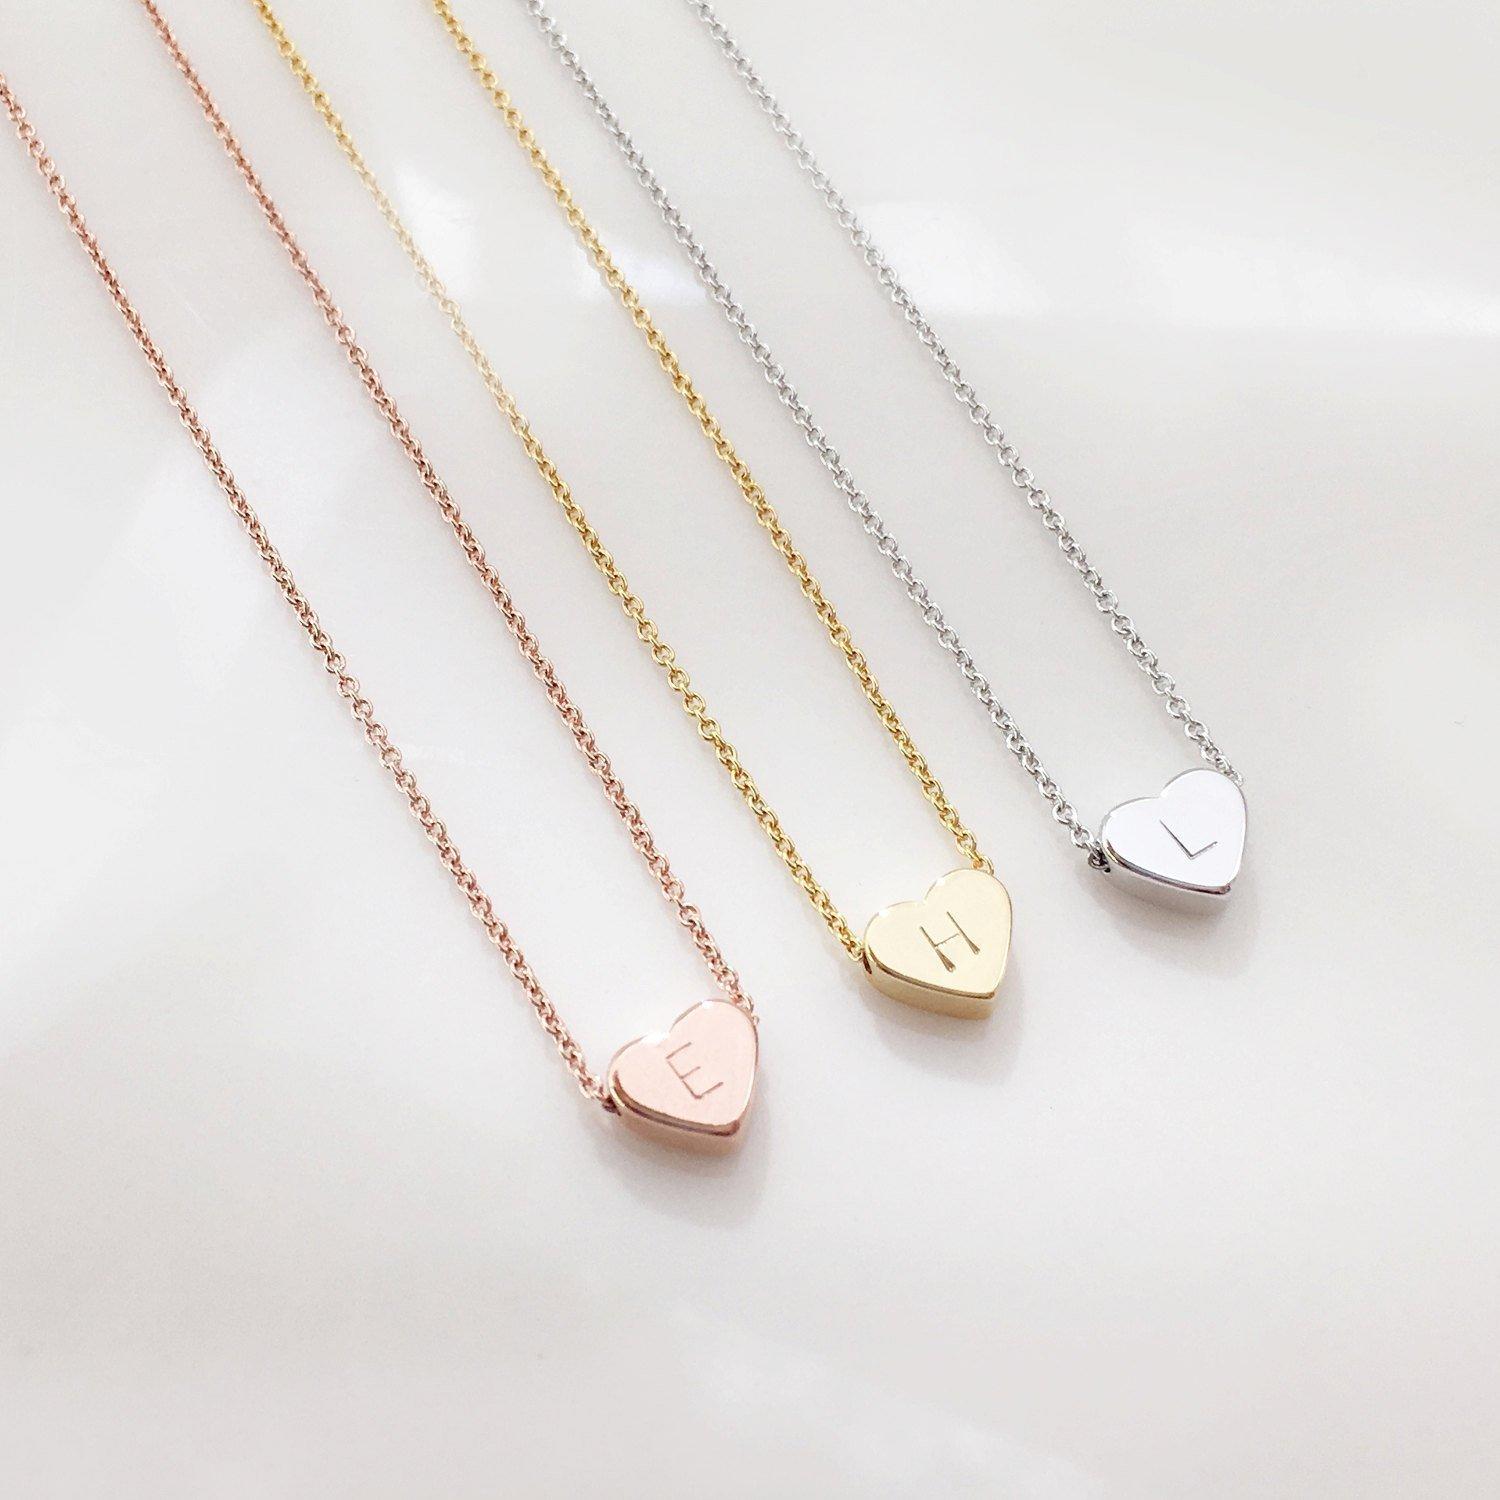 Personalized initial necklace 